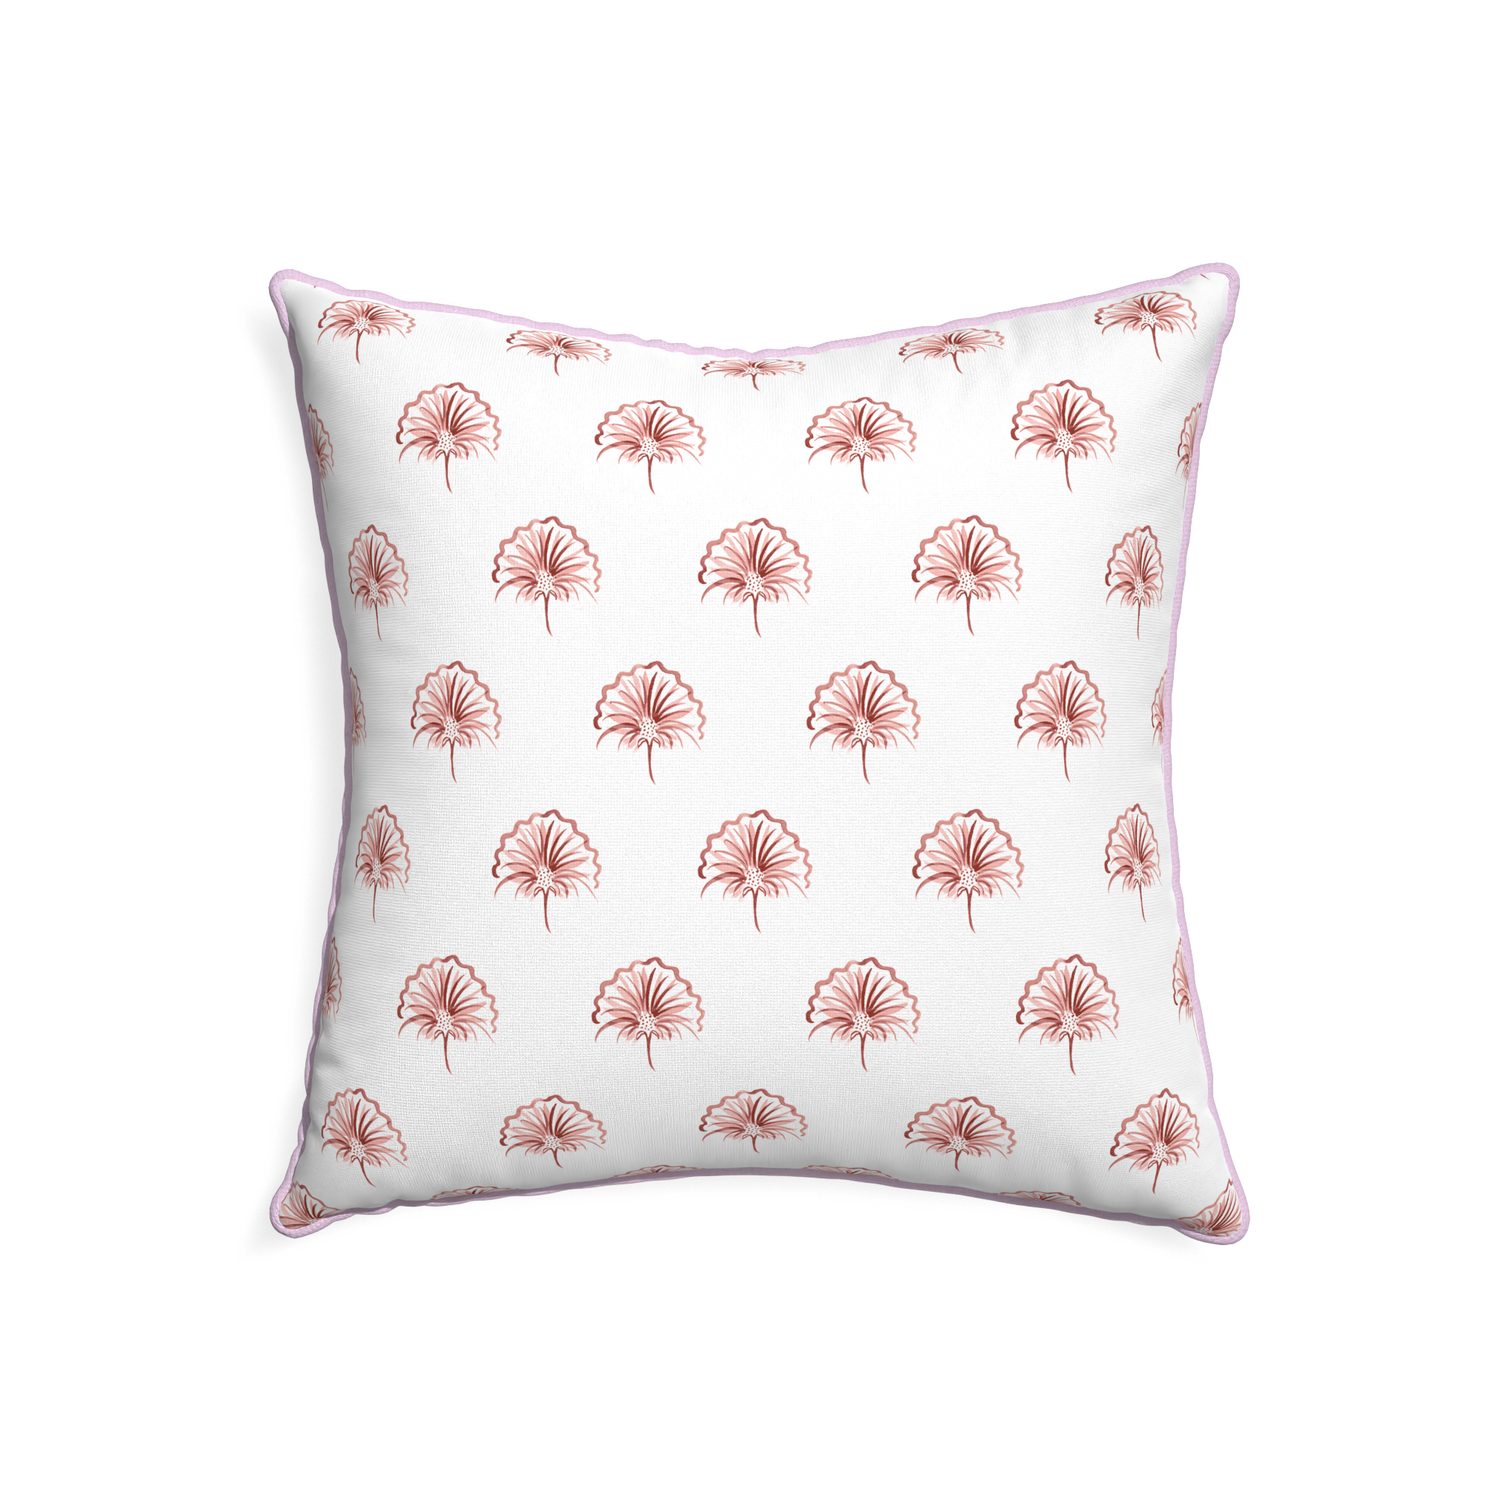 22-square penelope rose custom pillow with l piping on white background